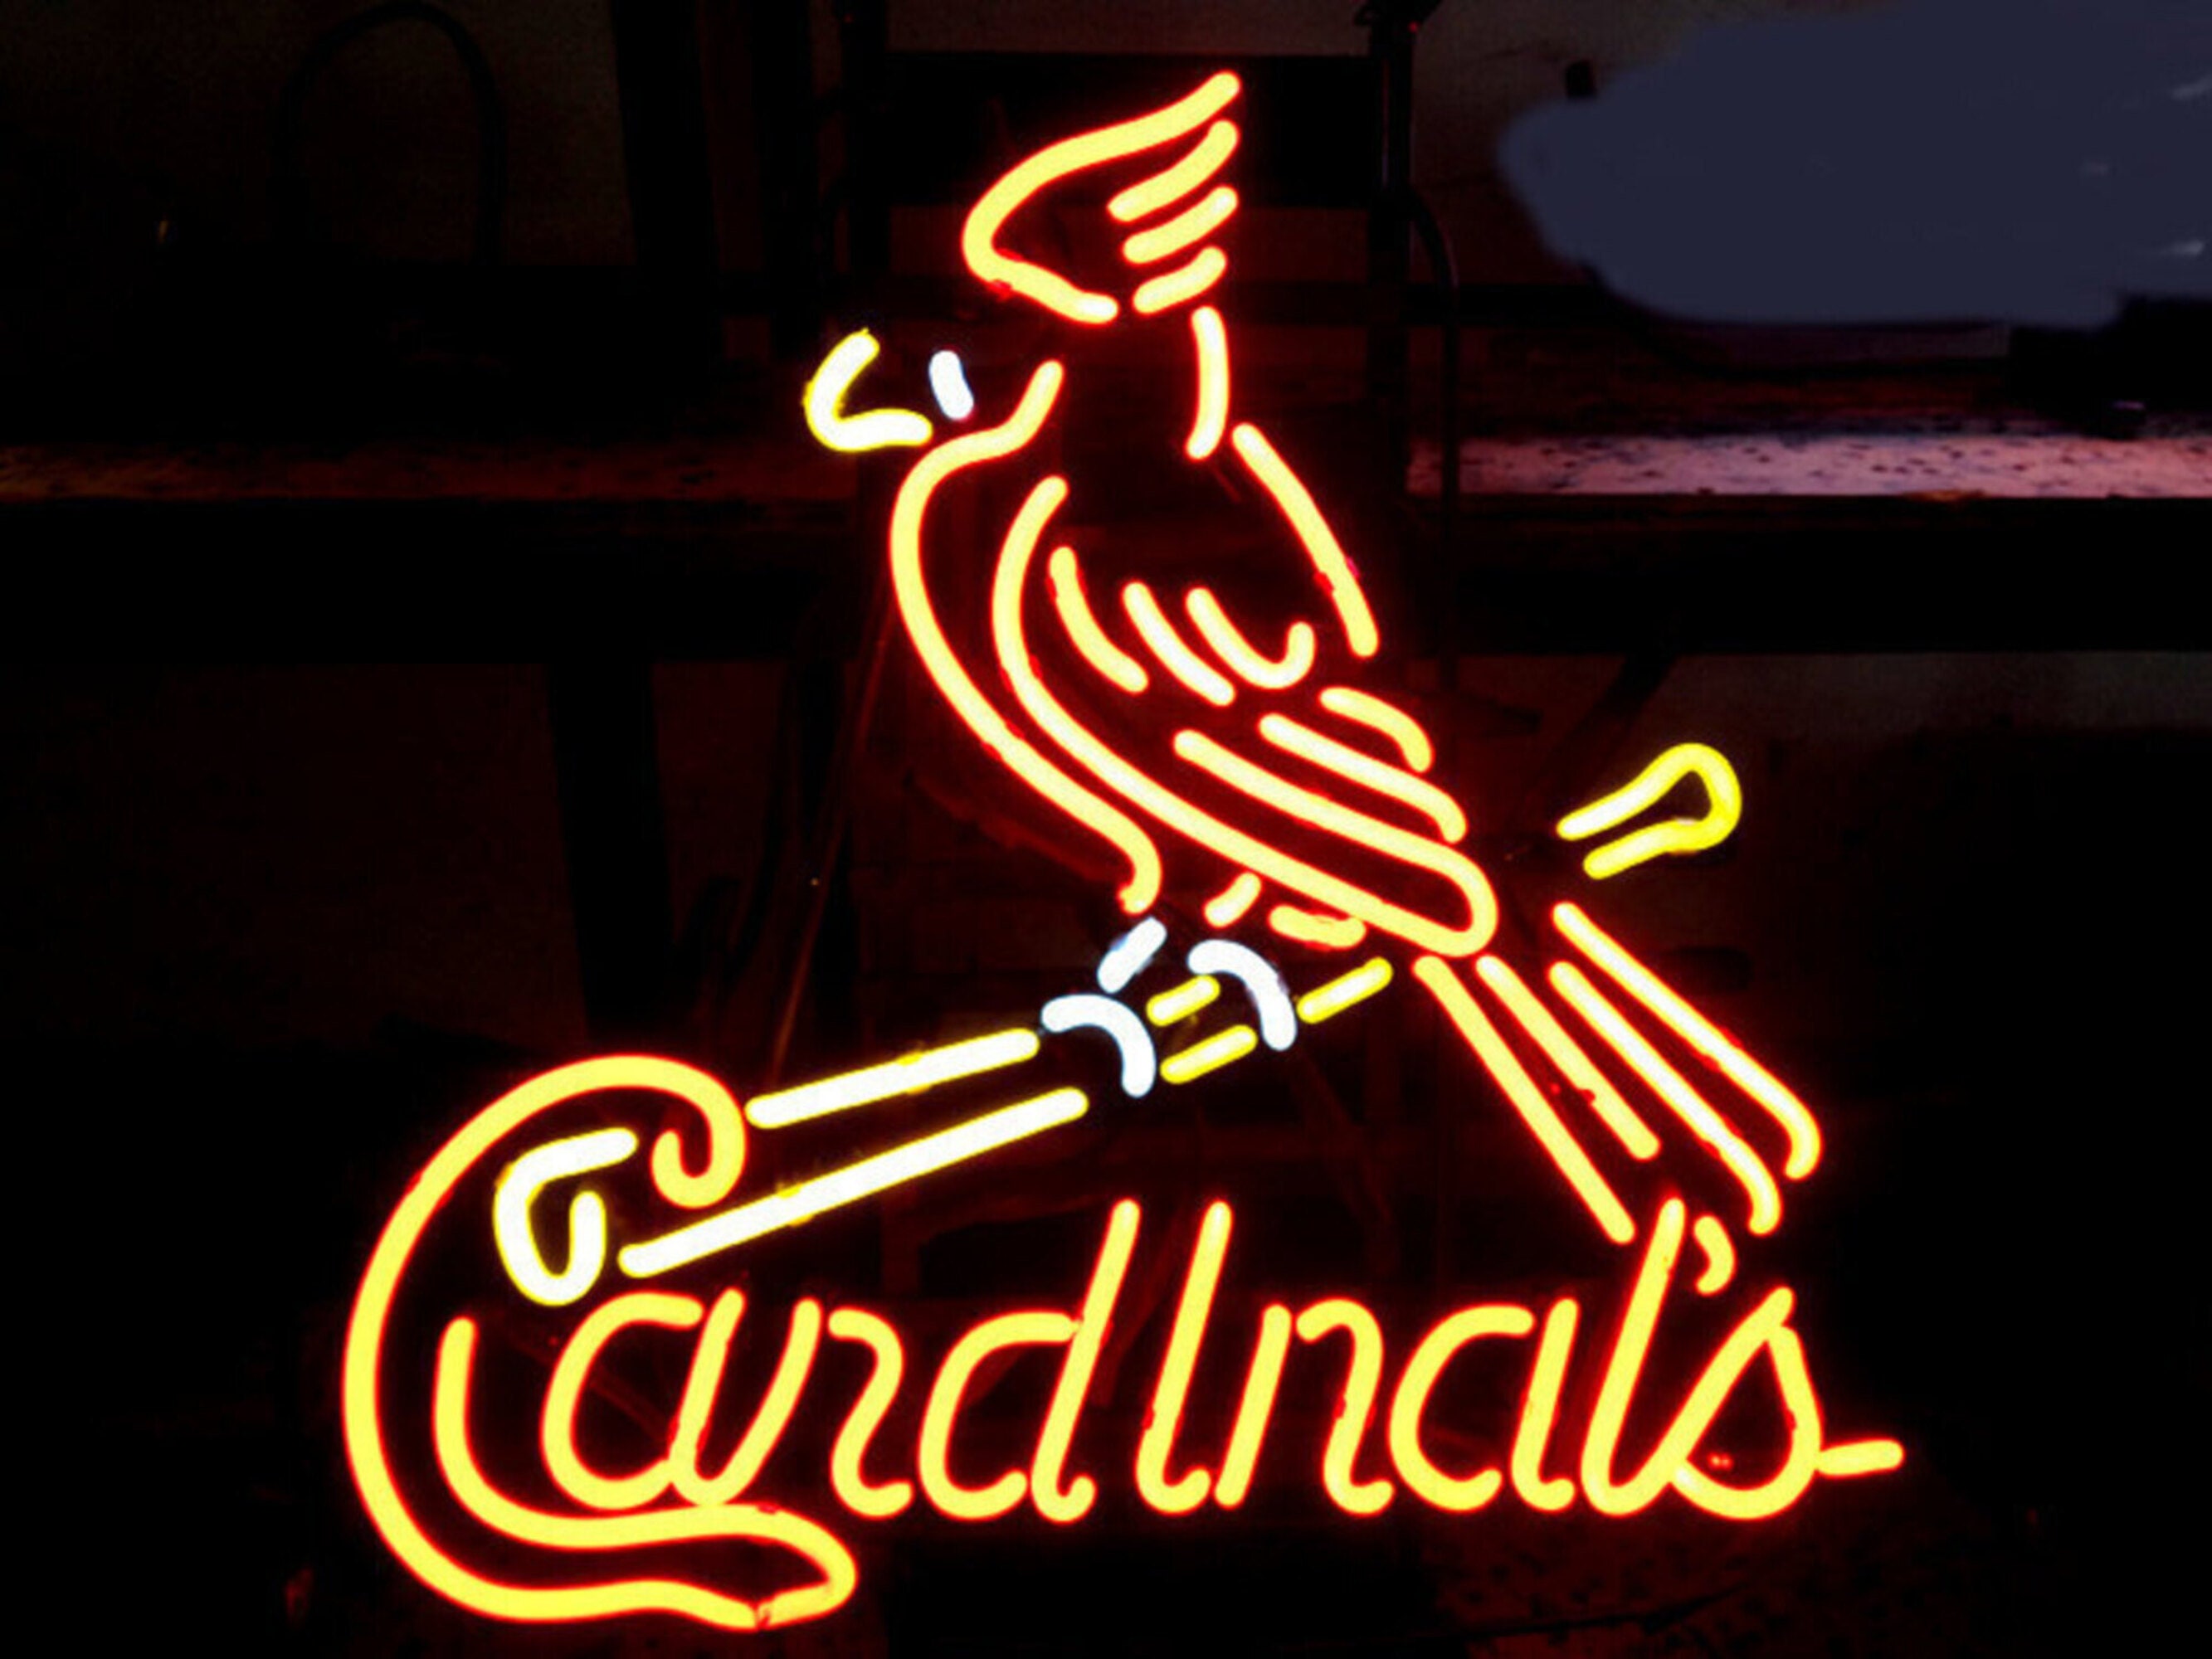 St. Louis Blues 3D Carved Neon Lamp Sign 14 Beer Hanging Nightlight Bar EY